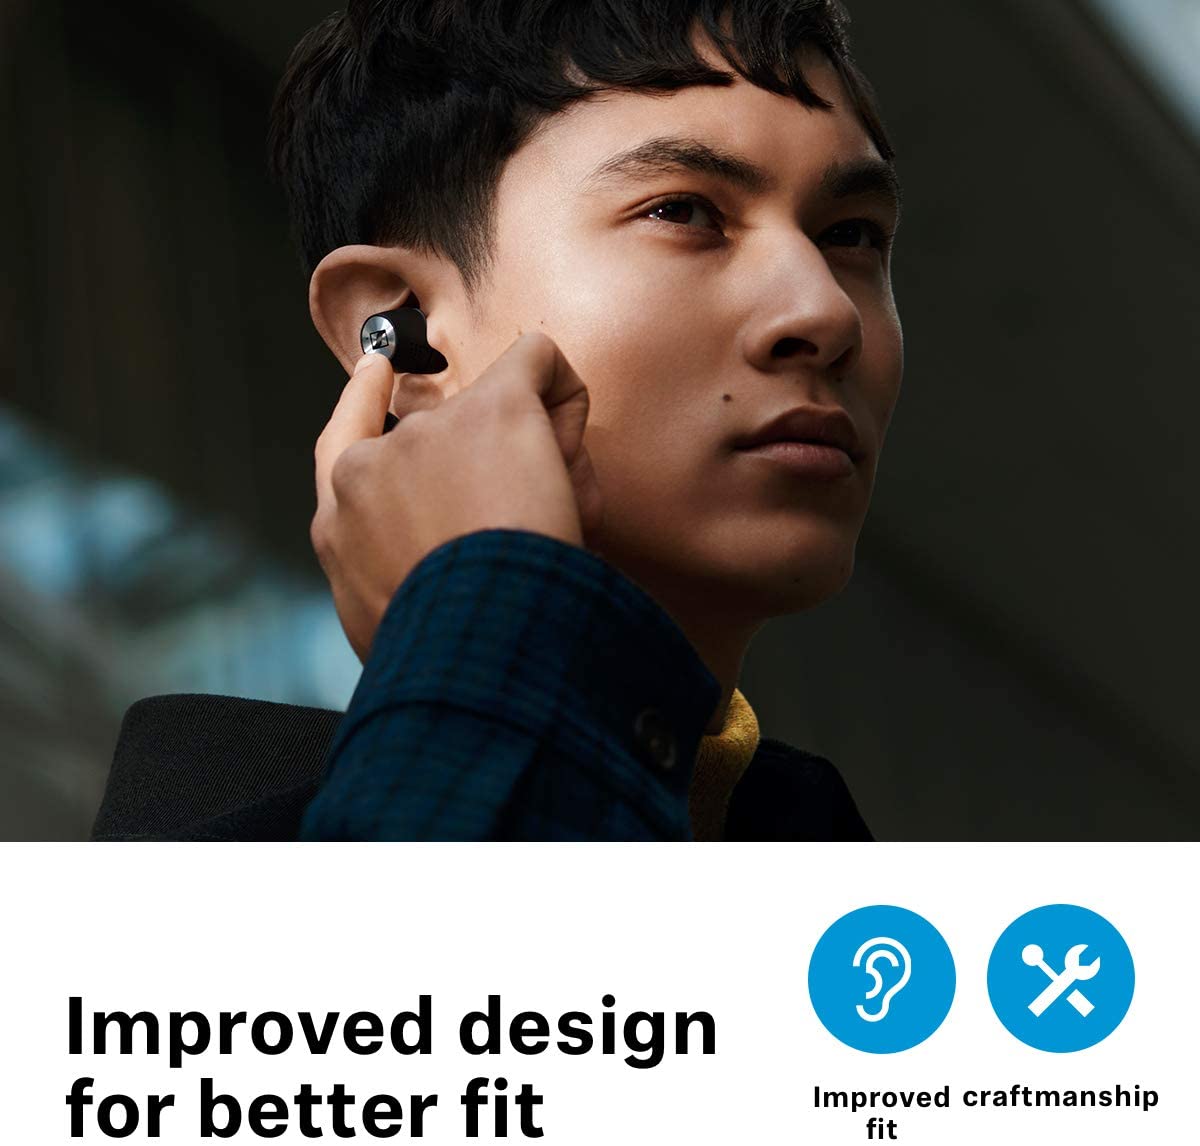 Sennheiser MOMENTUM True Wireless 2 Earbuds IPX4 Splash Resistant Bluetooth 5.1 Noise-Cancelling In-Ear Headphones with 2 Mics 7h Playtime